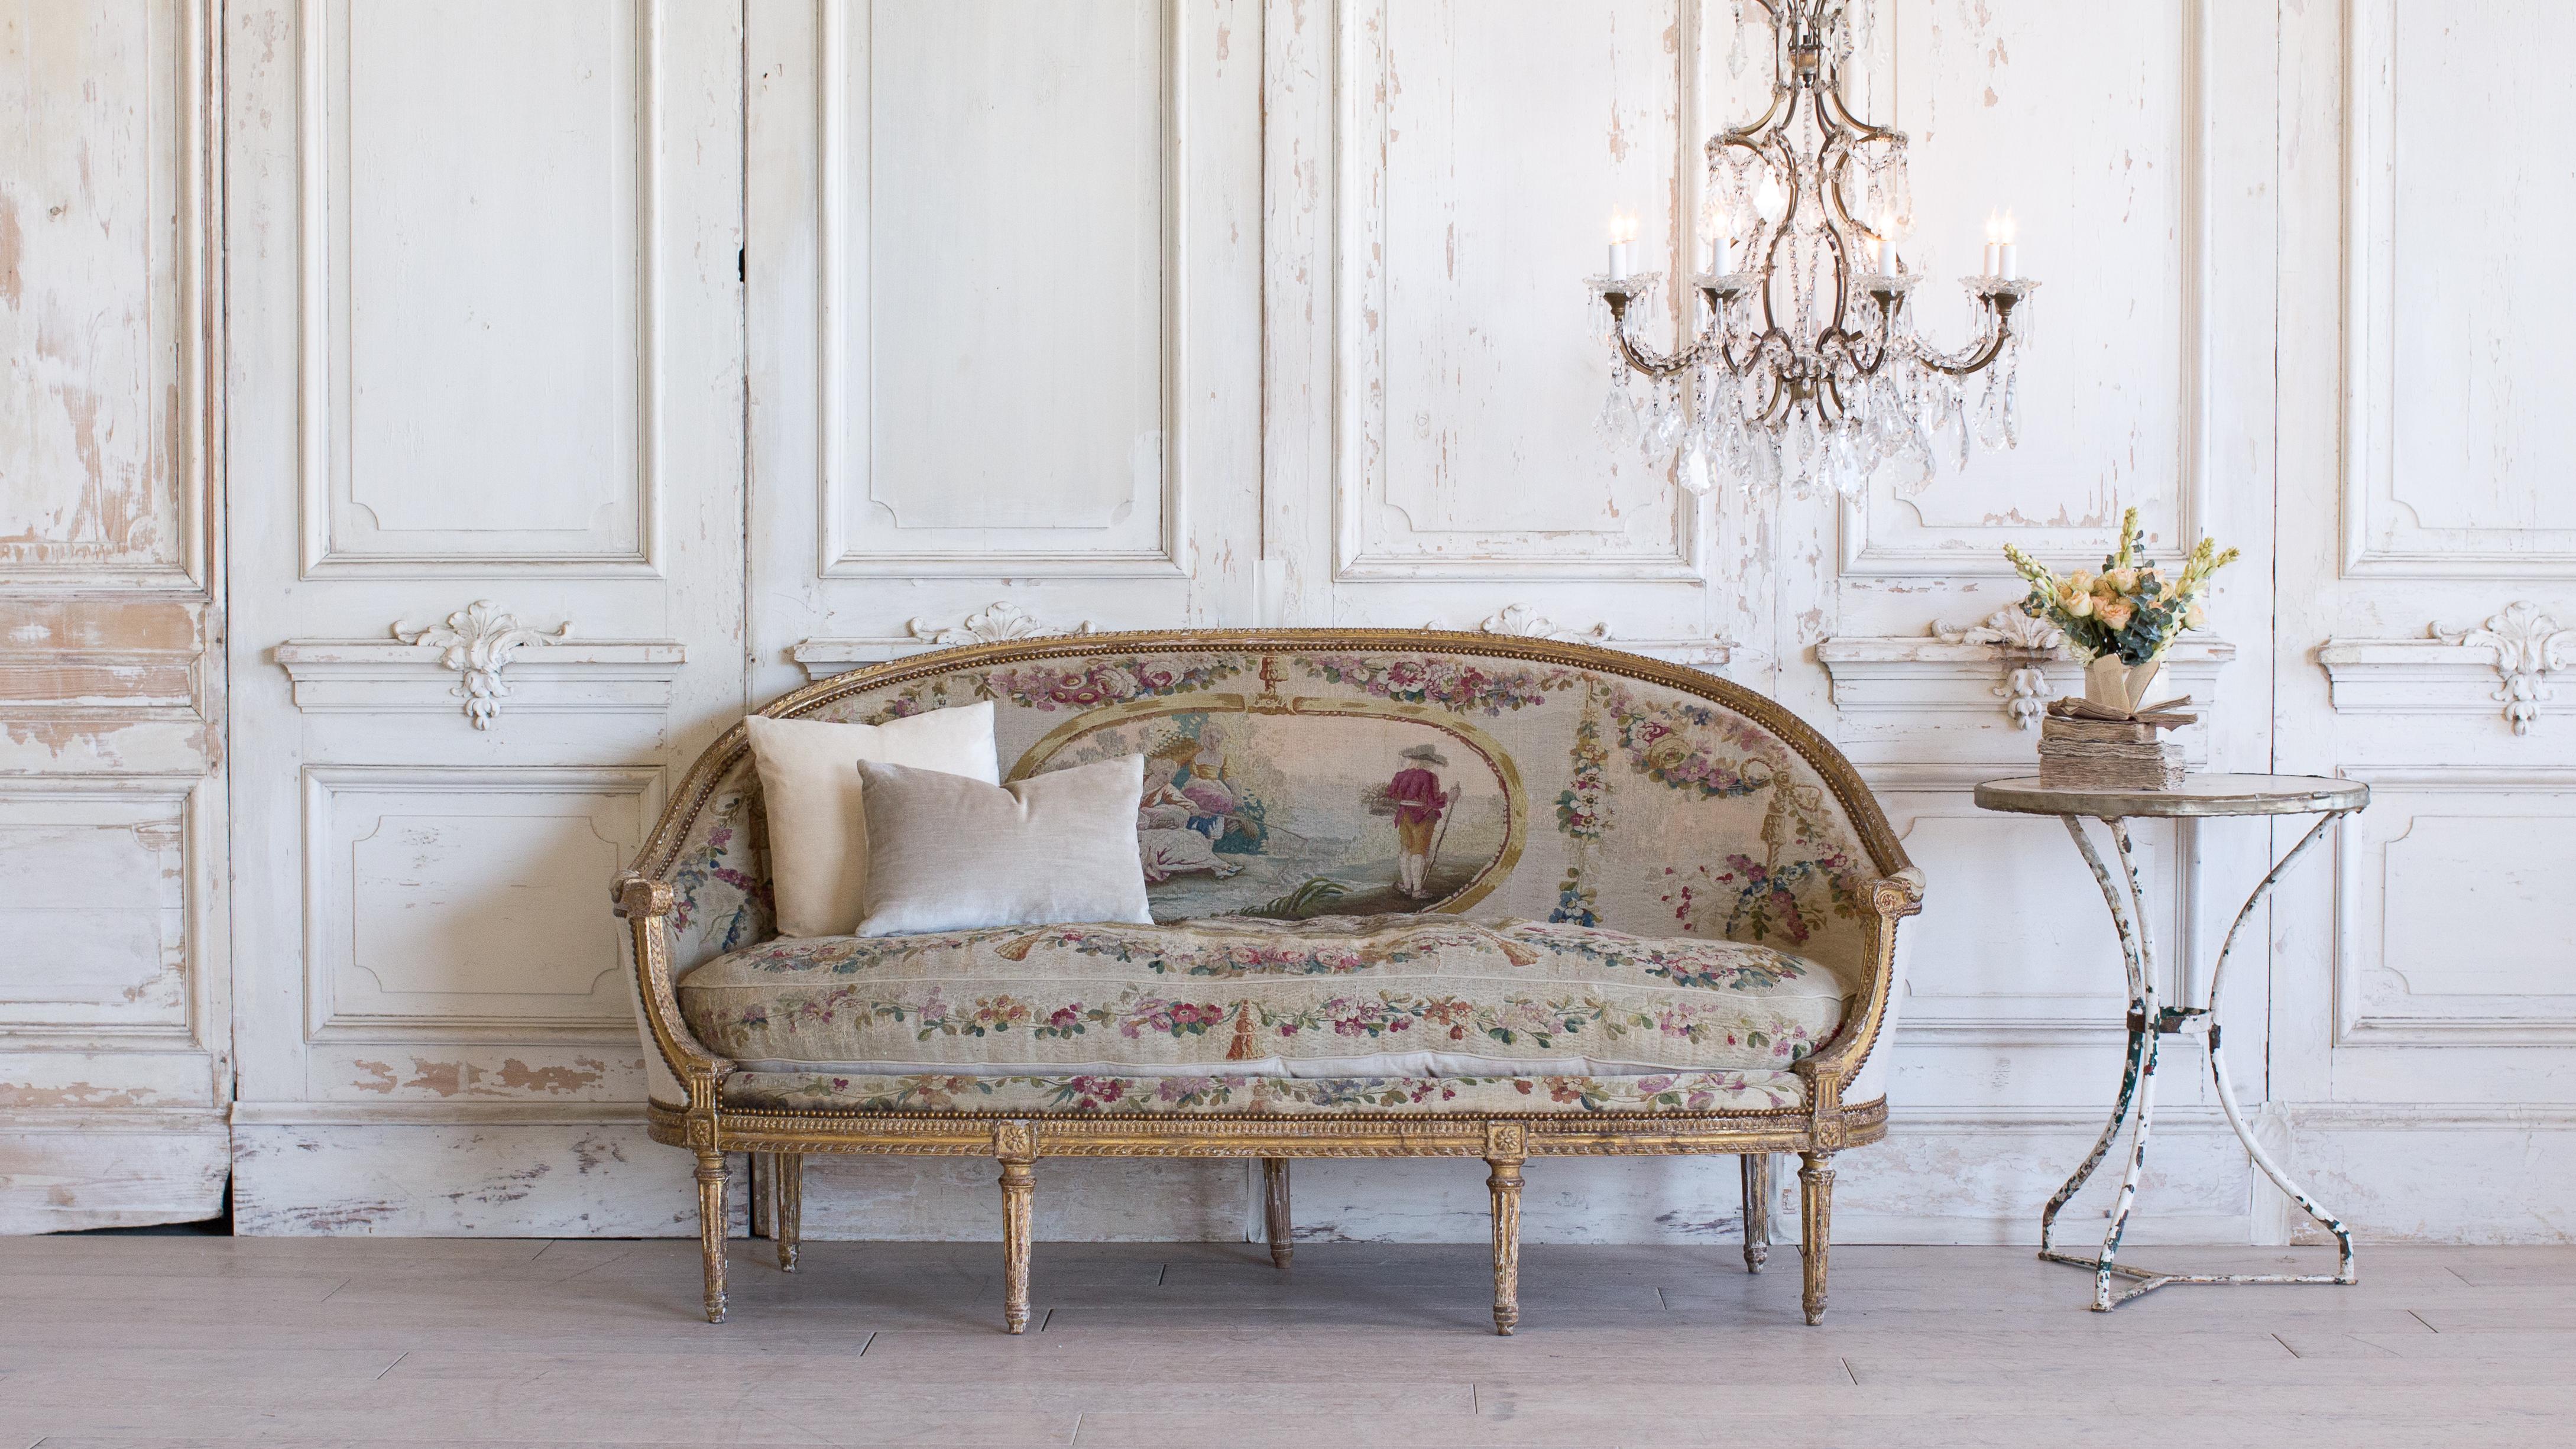 Divine antique Louis XVI oval-shaped canape with original needlepoint. The beautiful scene depicts the French countryside. Amazing worn gold gilt finish and fine carving decorate the fluted legs. A glorious tribute and statement piece.